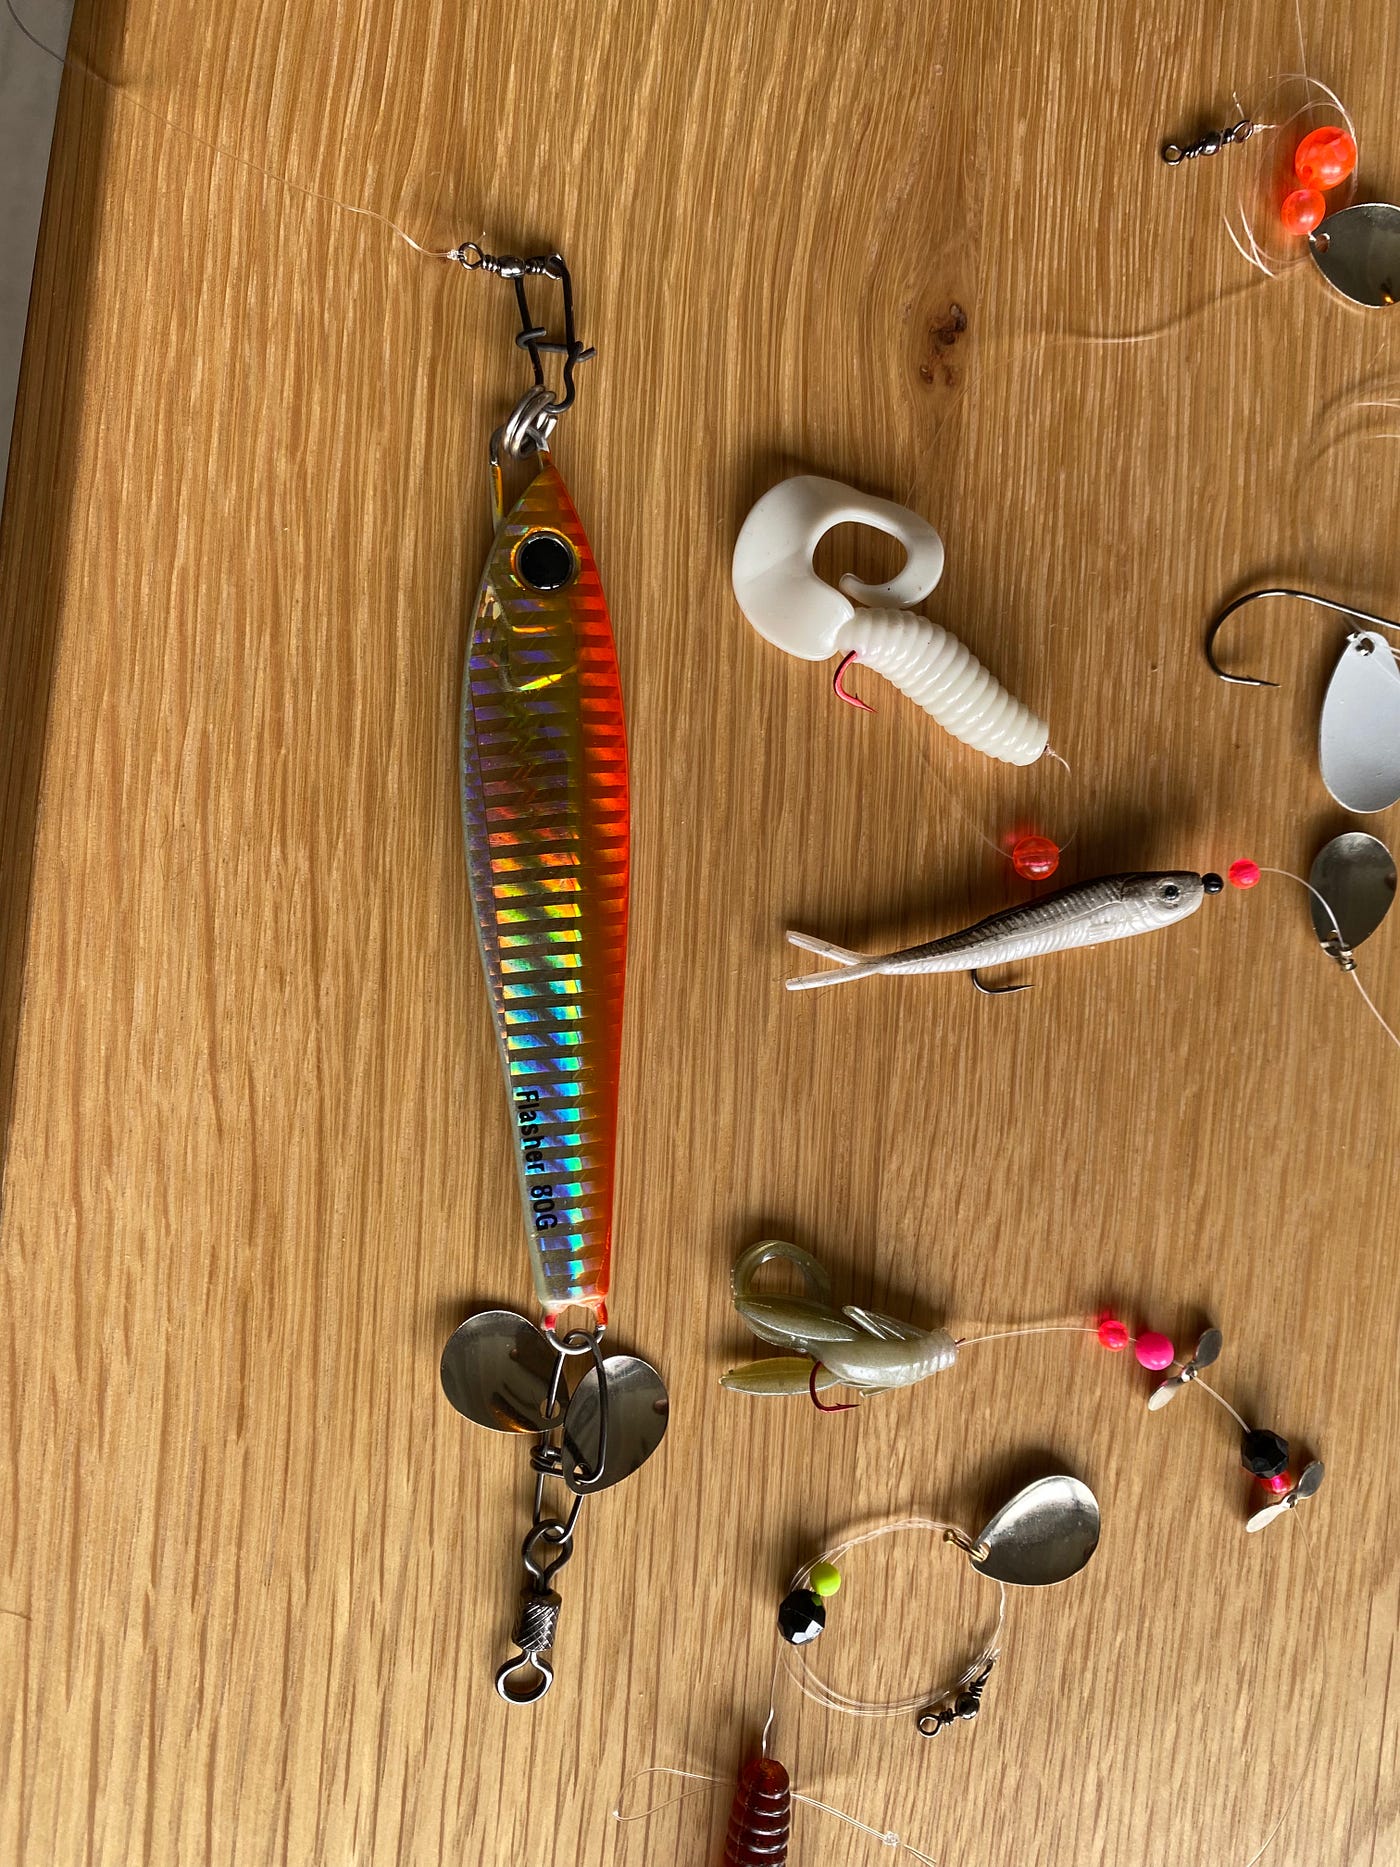 Rapala knot for small Perch lures - Coarse Fishing Knots